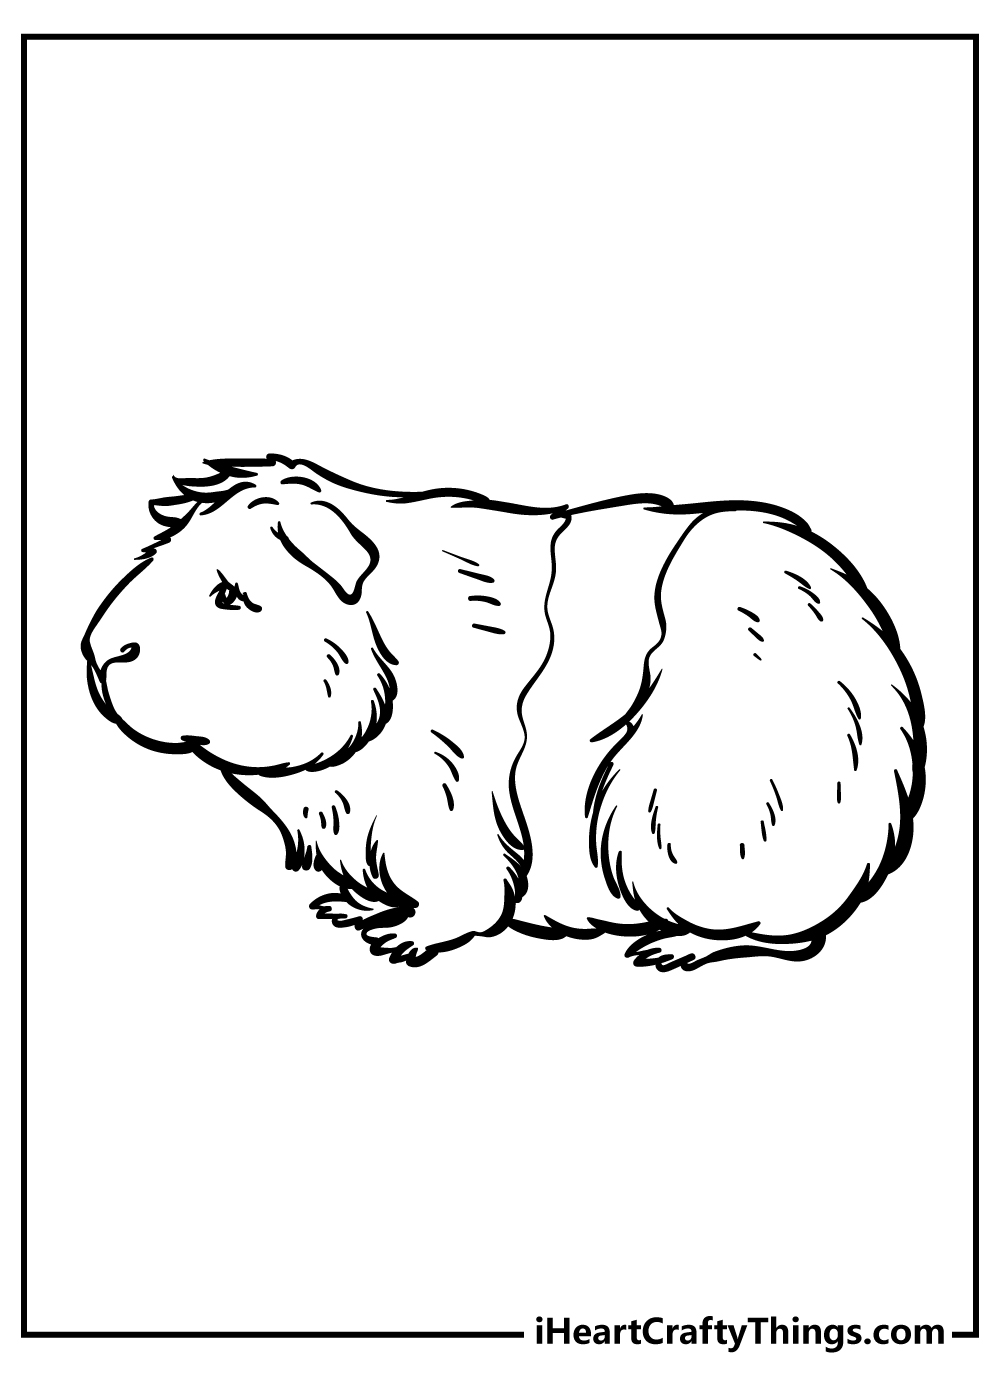 Guinea Pig Coloring Pages free pdf download